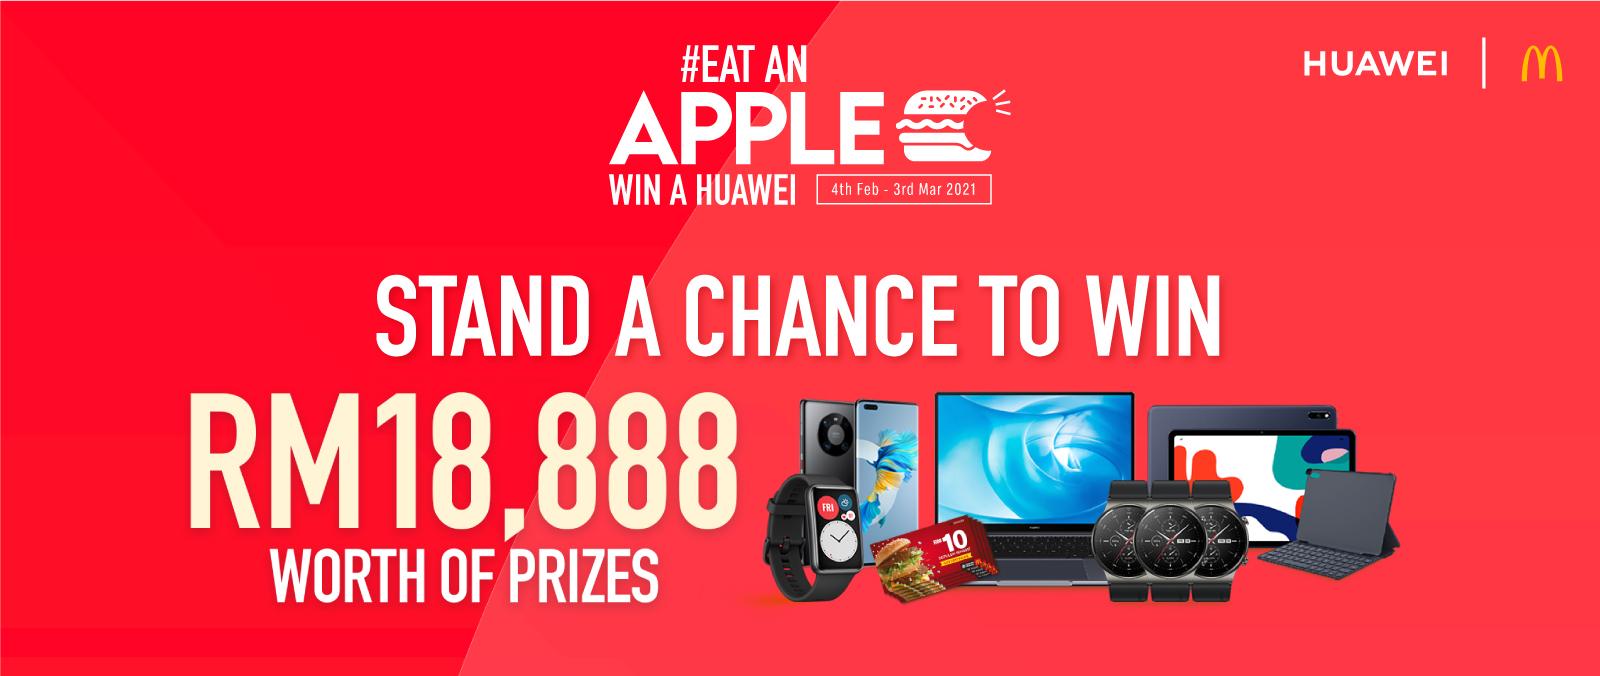 #EatAnApple and Win A Huawei Contest's image'